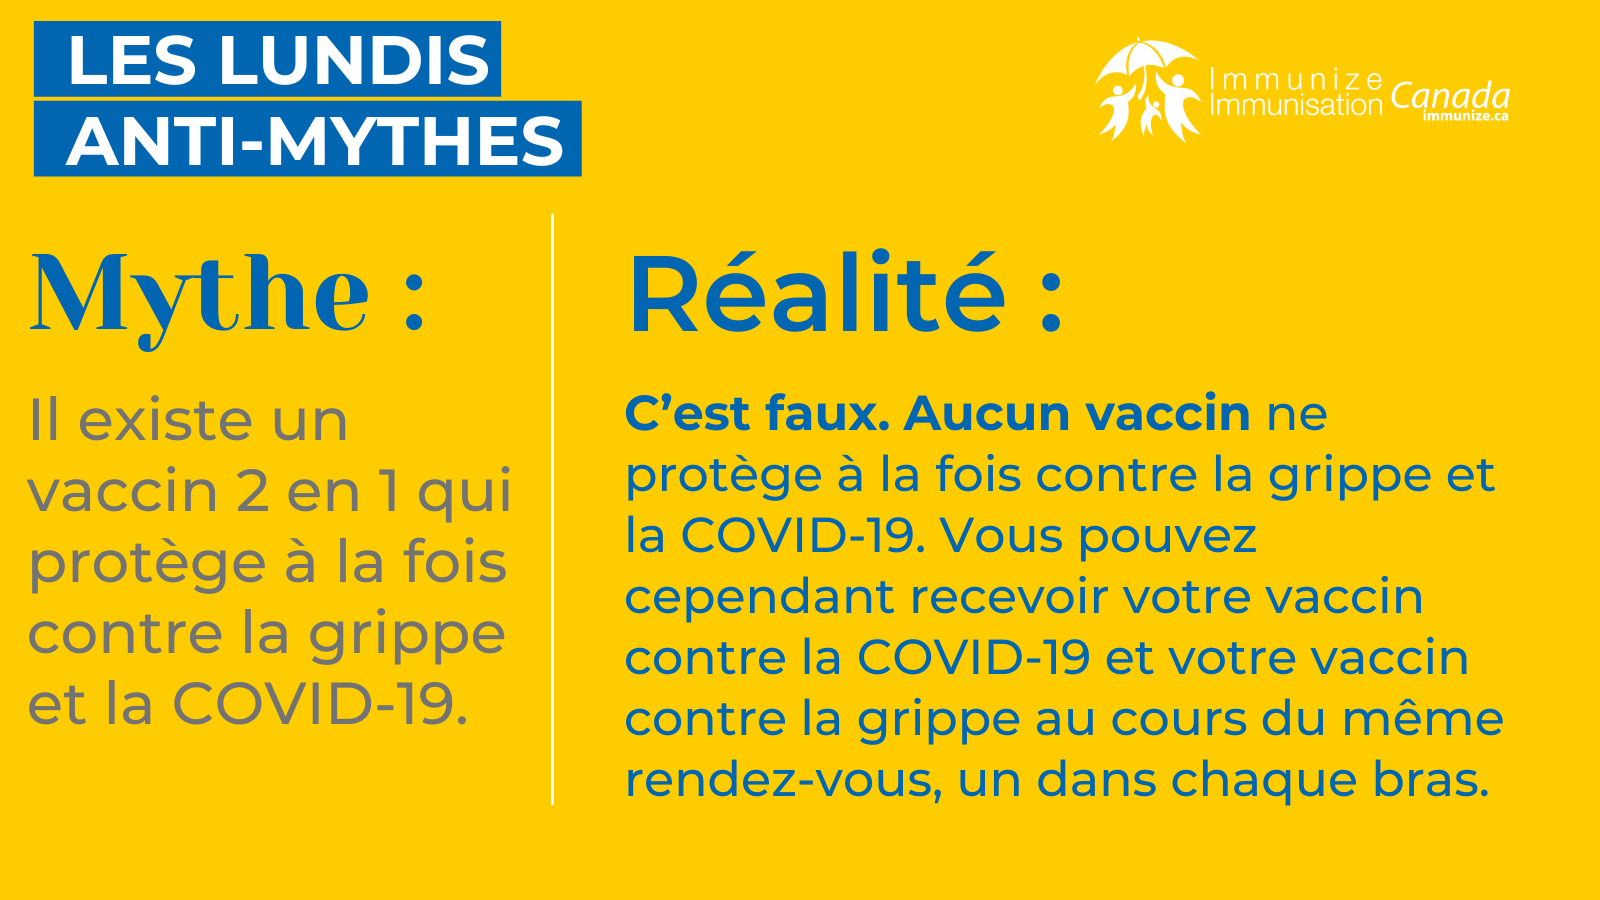 Les lundis anti-mythes - COVID-19 - image 5 pour Twitter/X